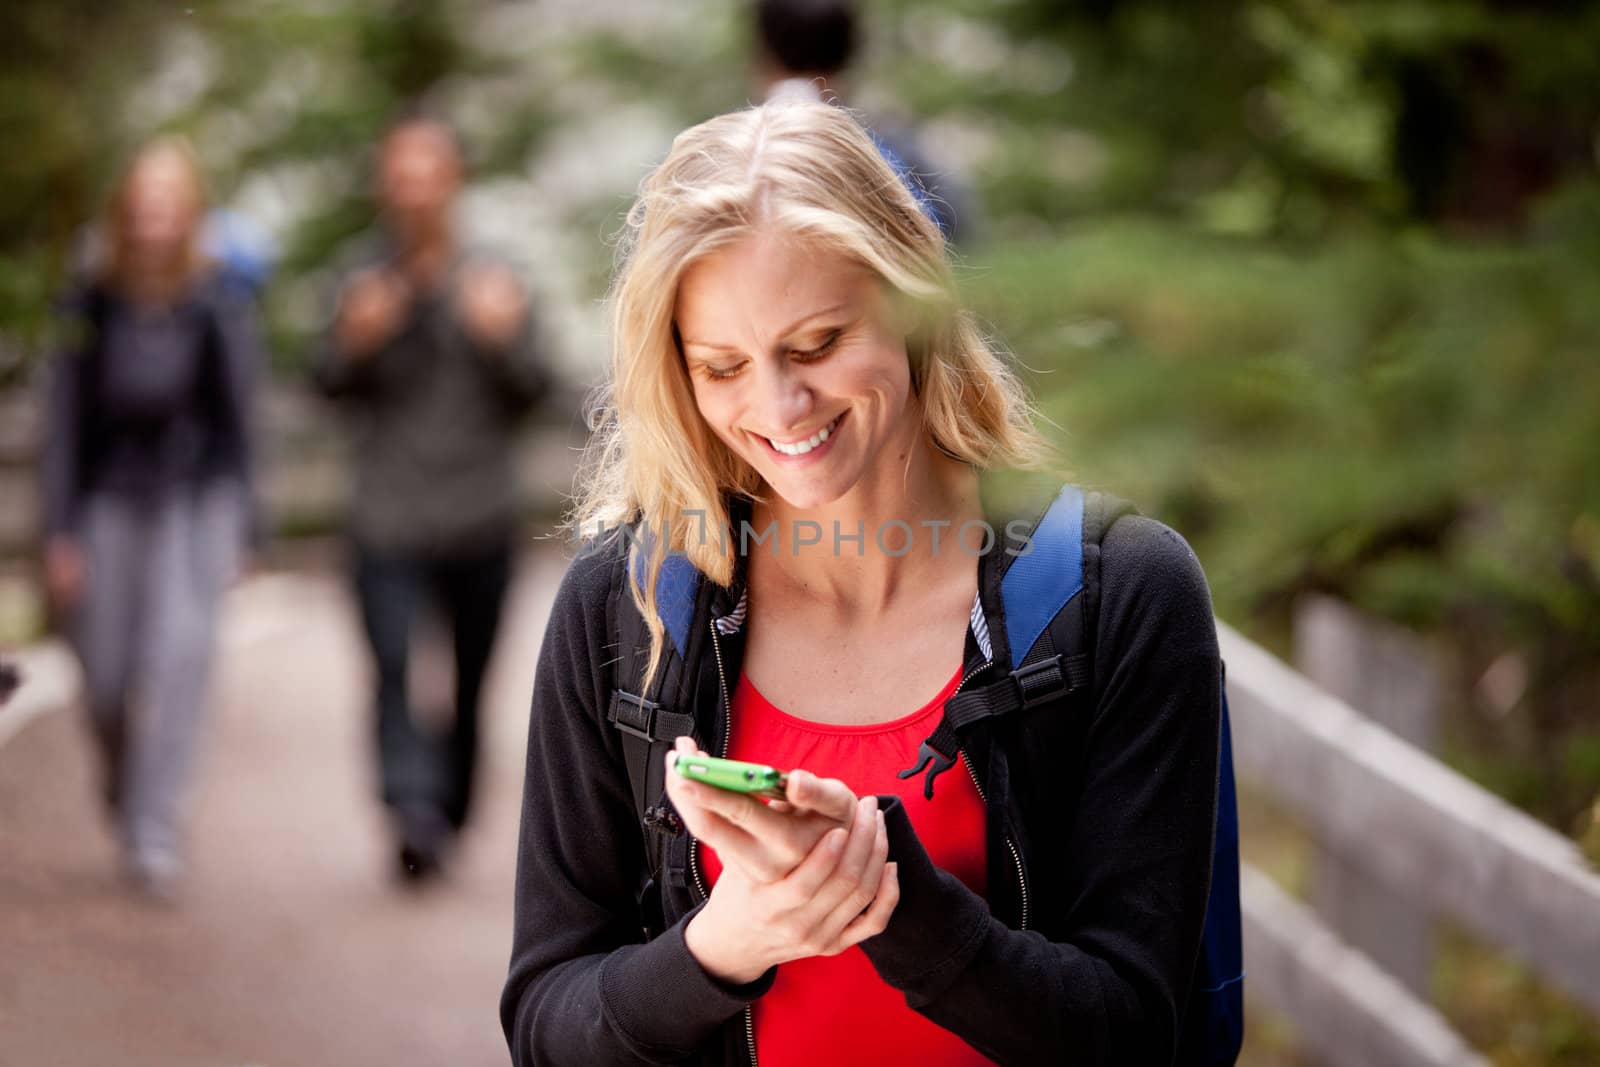 A young woman reading a friendly text while outdoors